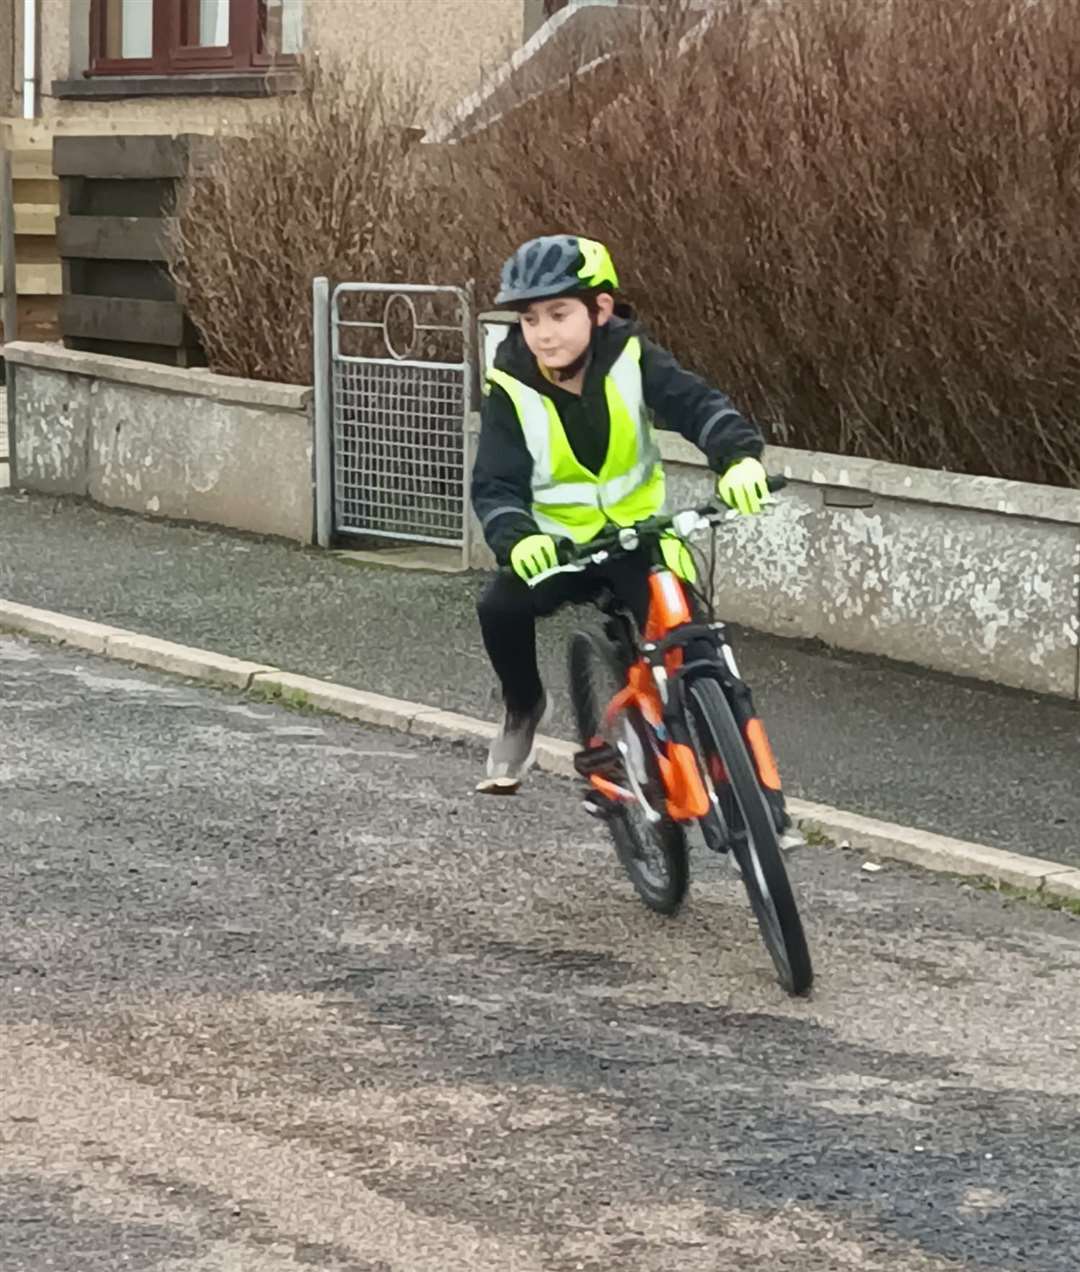 A student gets used to riding a bicycle safely on the road.